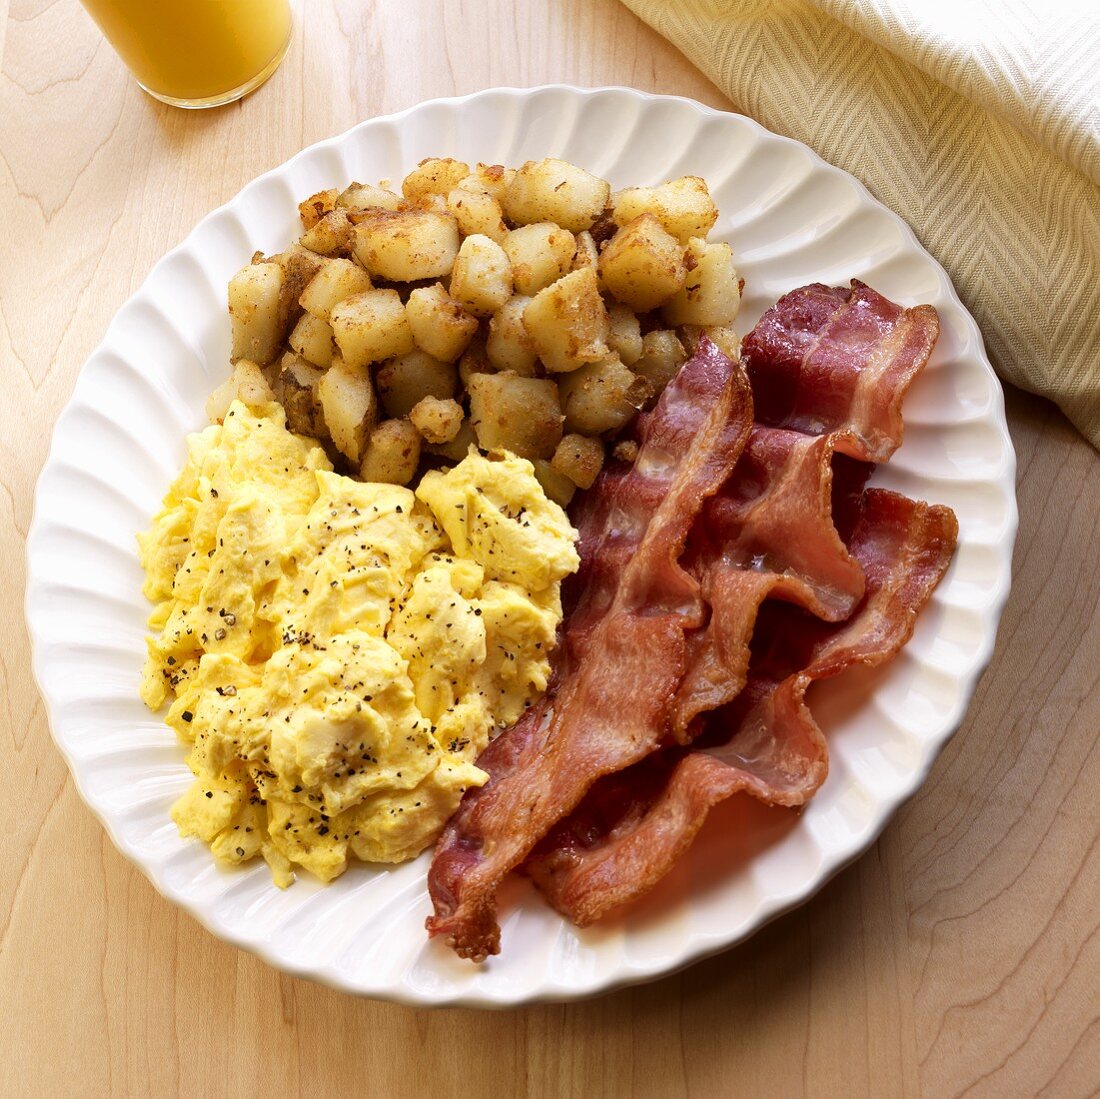 Scrambled Eggs, Thick Sliced Bacon and Home Fries